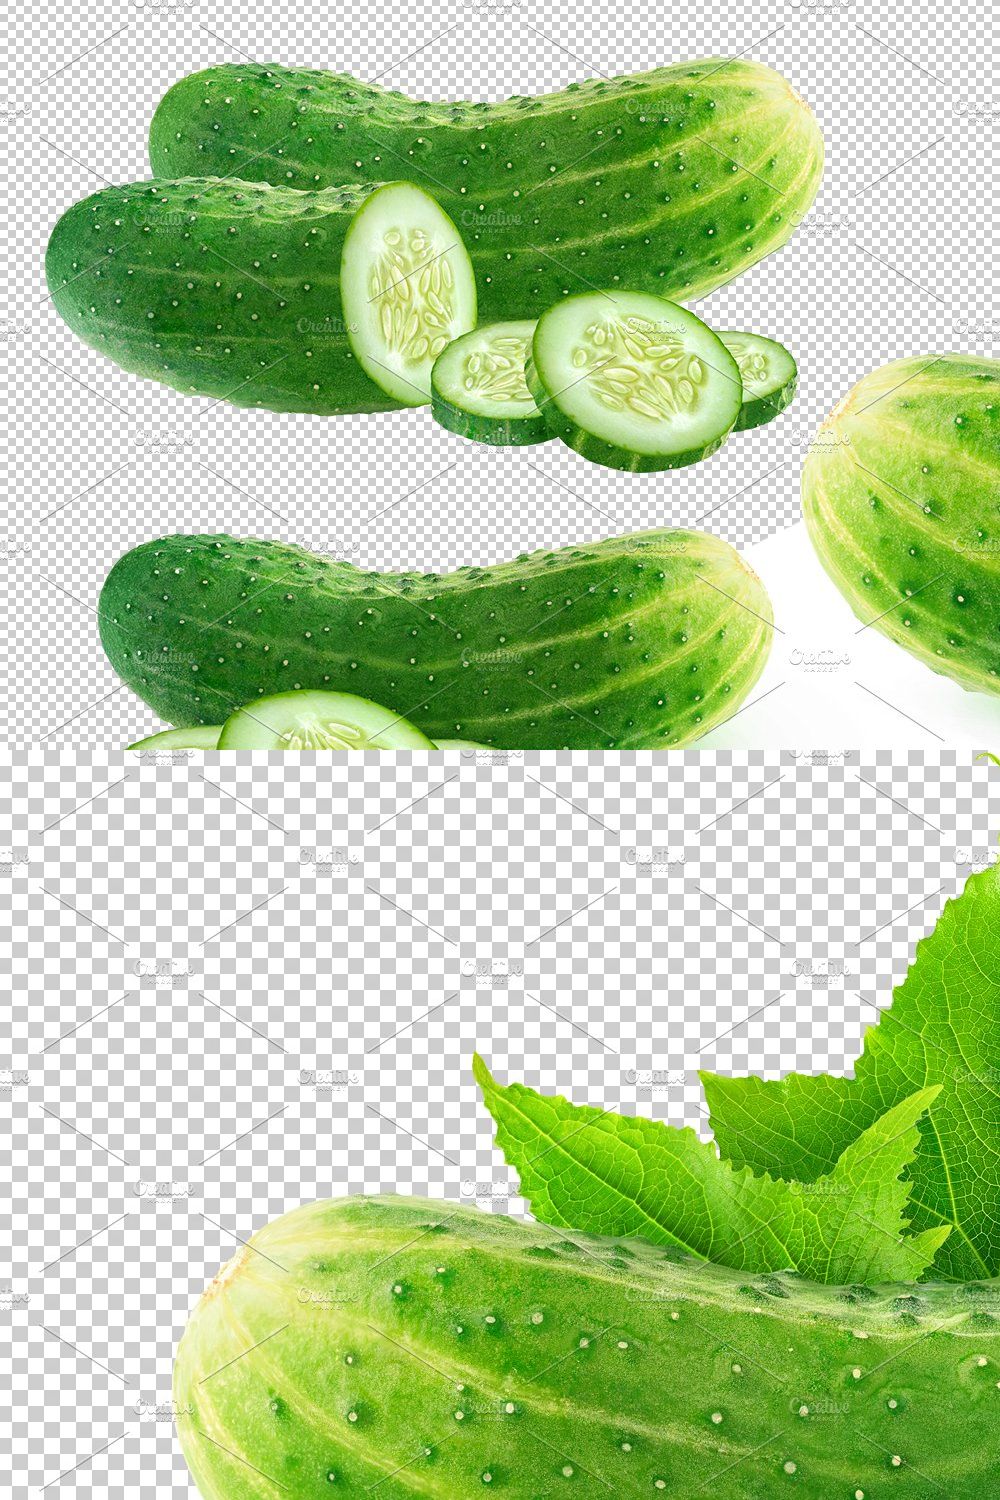 Cut cucumbers pinterest preview image.